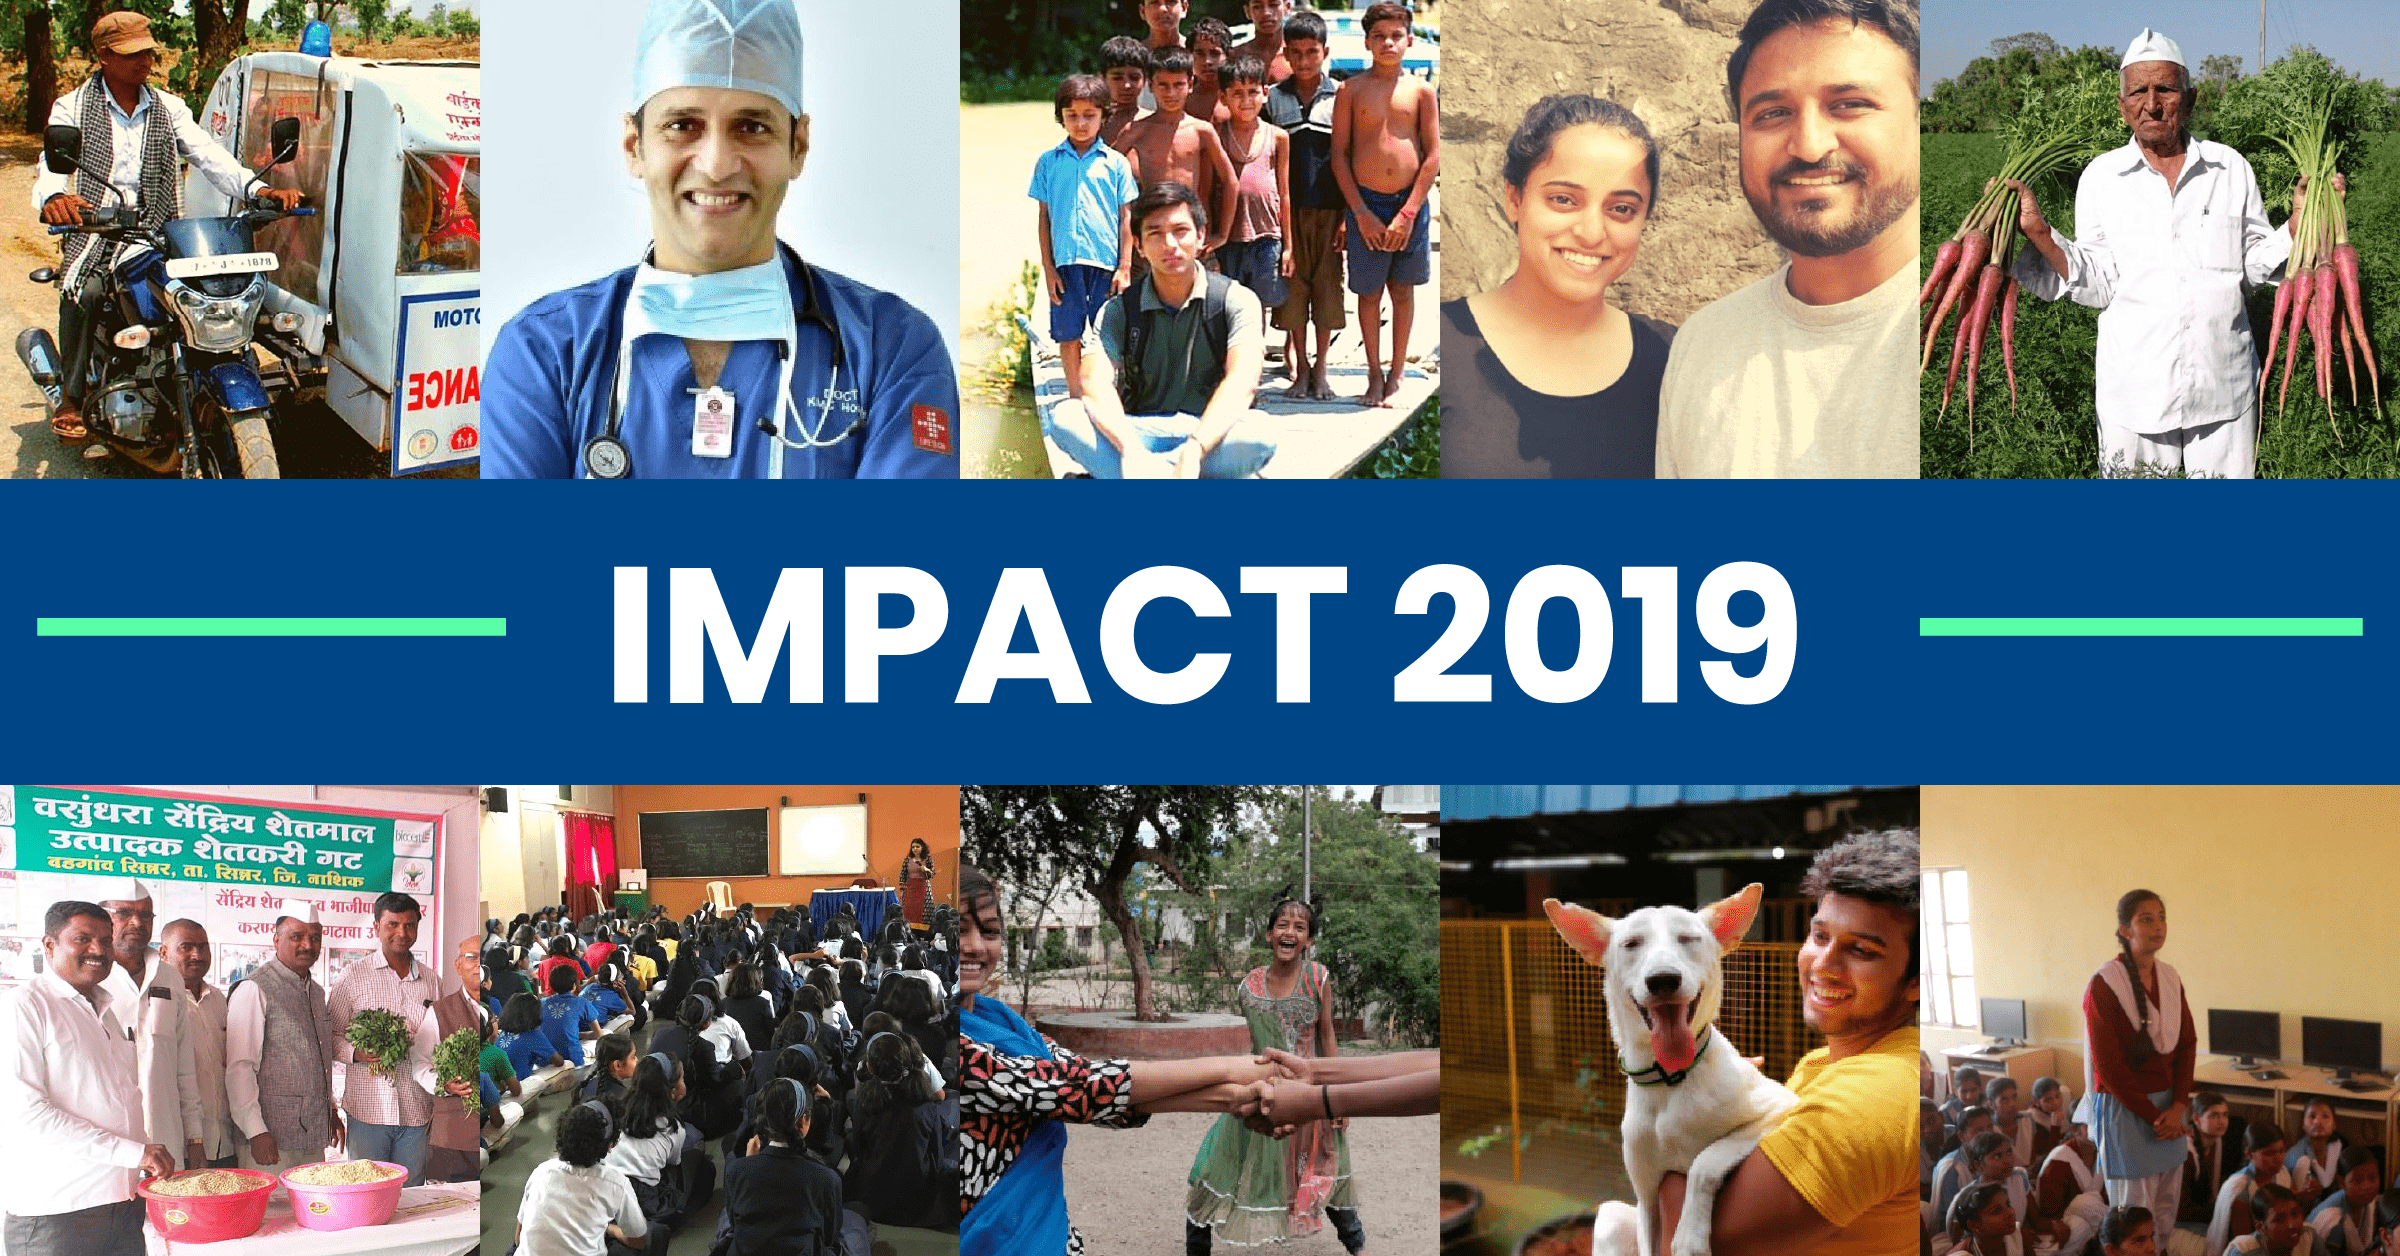 They Came by the Millions: How Our Readers Created Positive Impact in 2019